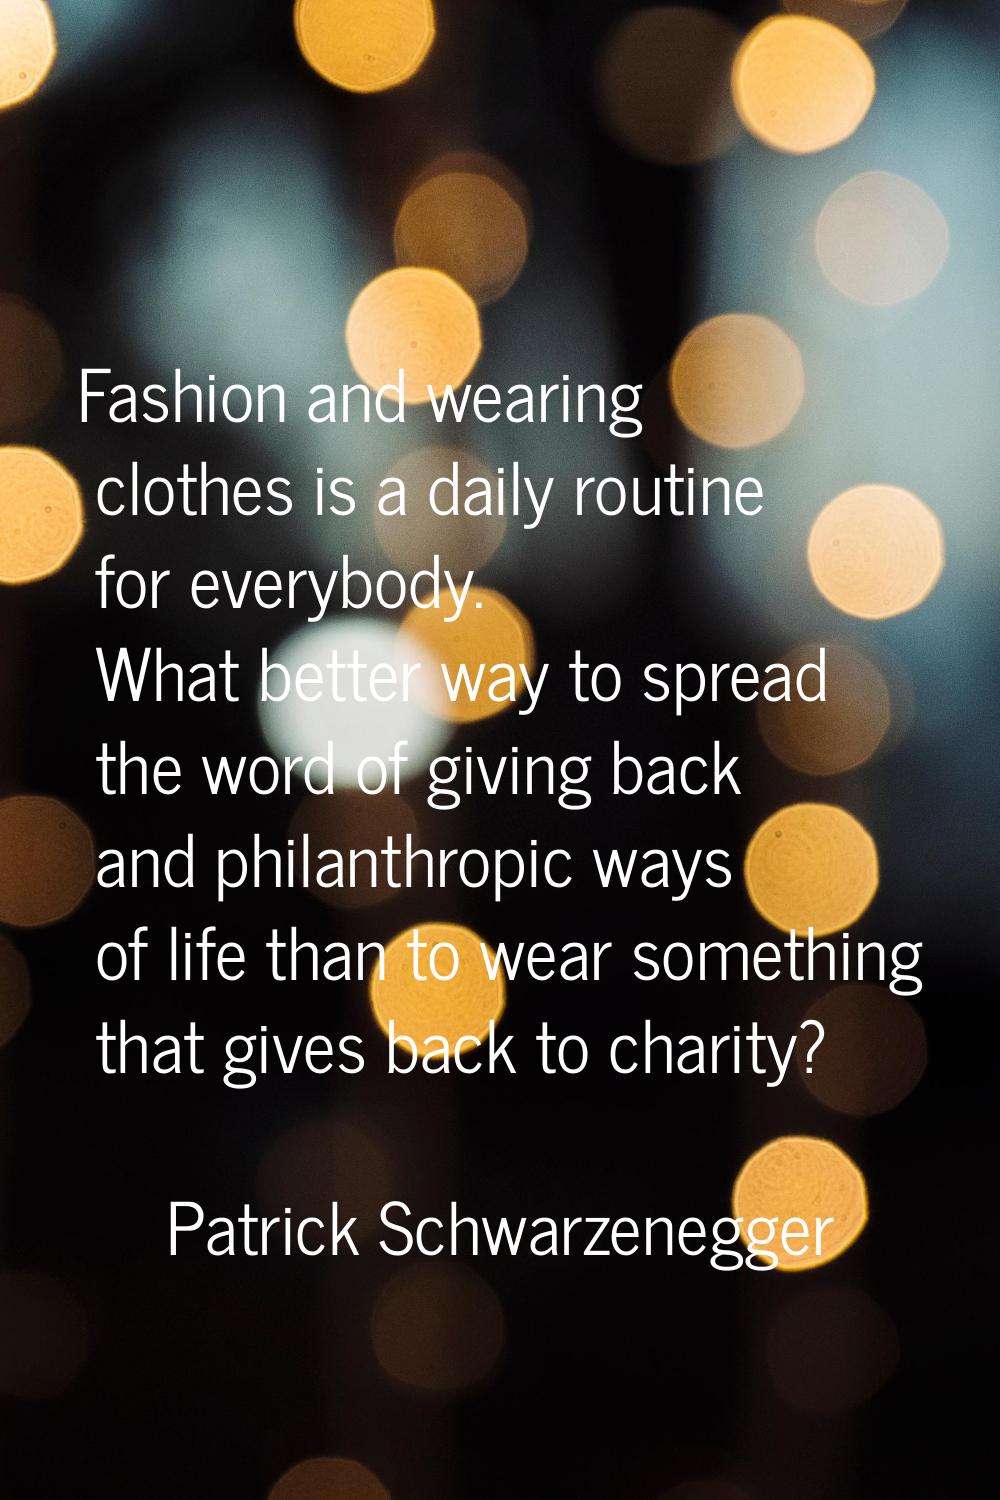 Fashion and wearing clothes is a daily routine for everybody. What better way to spread the word of